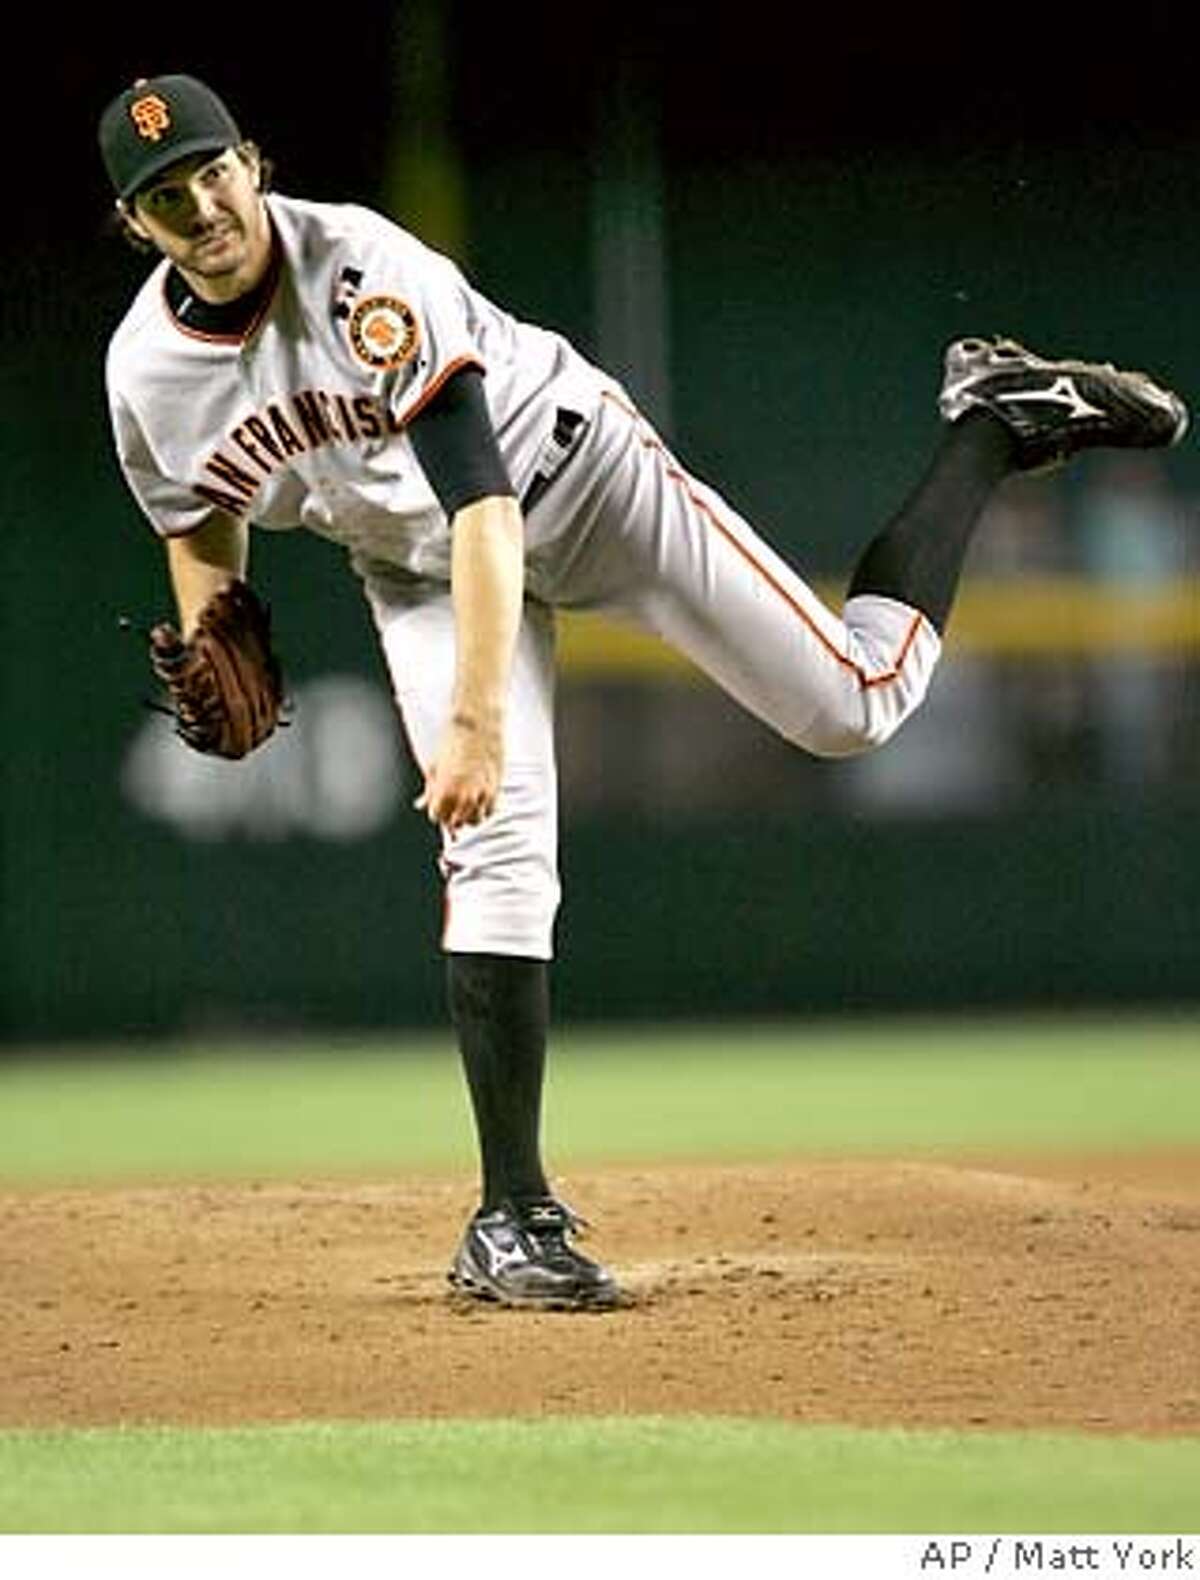 San Francisco Giants pitcher Barry Zito follows through on a pitch against the Arizona Diamondbacks during the first inning of a baseball game Wednesday, Sept. 19, 2007, in Phoenix. (AP Photo/Matt York)